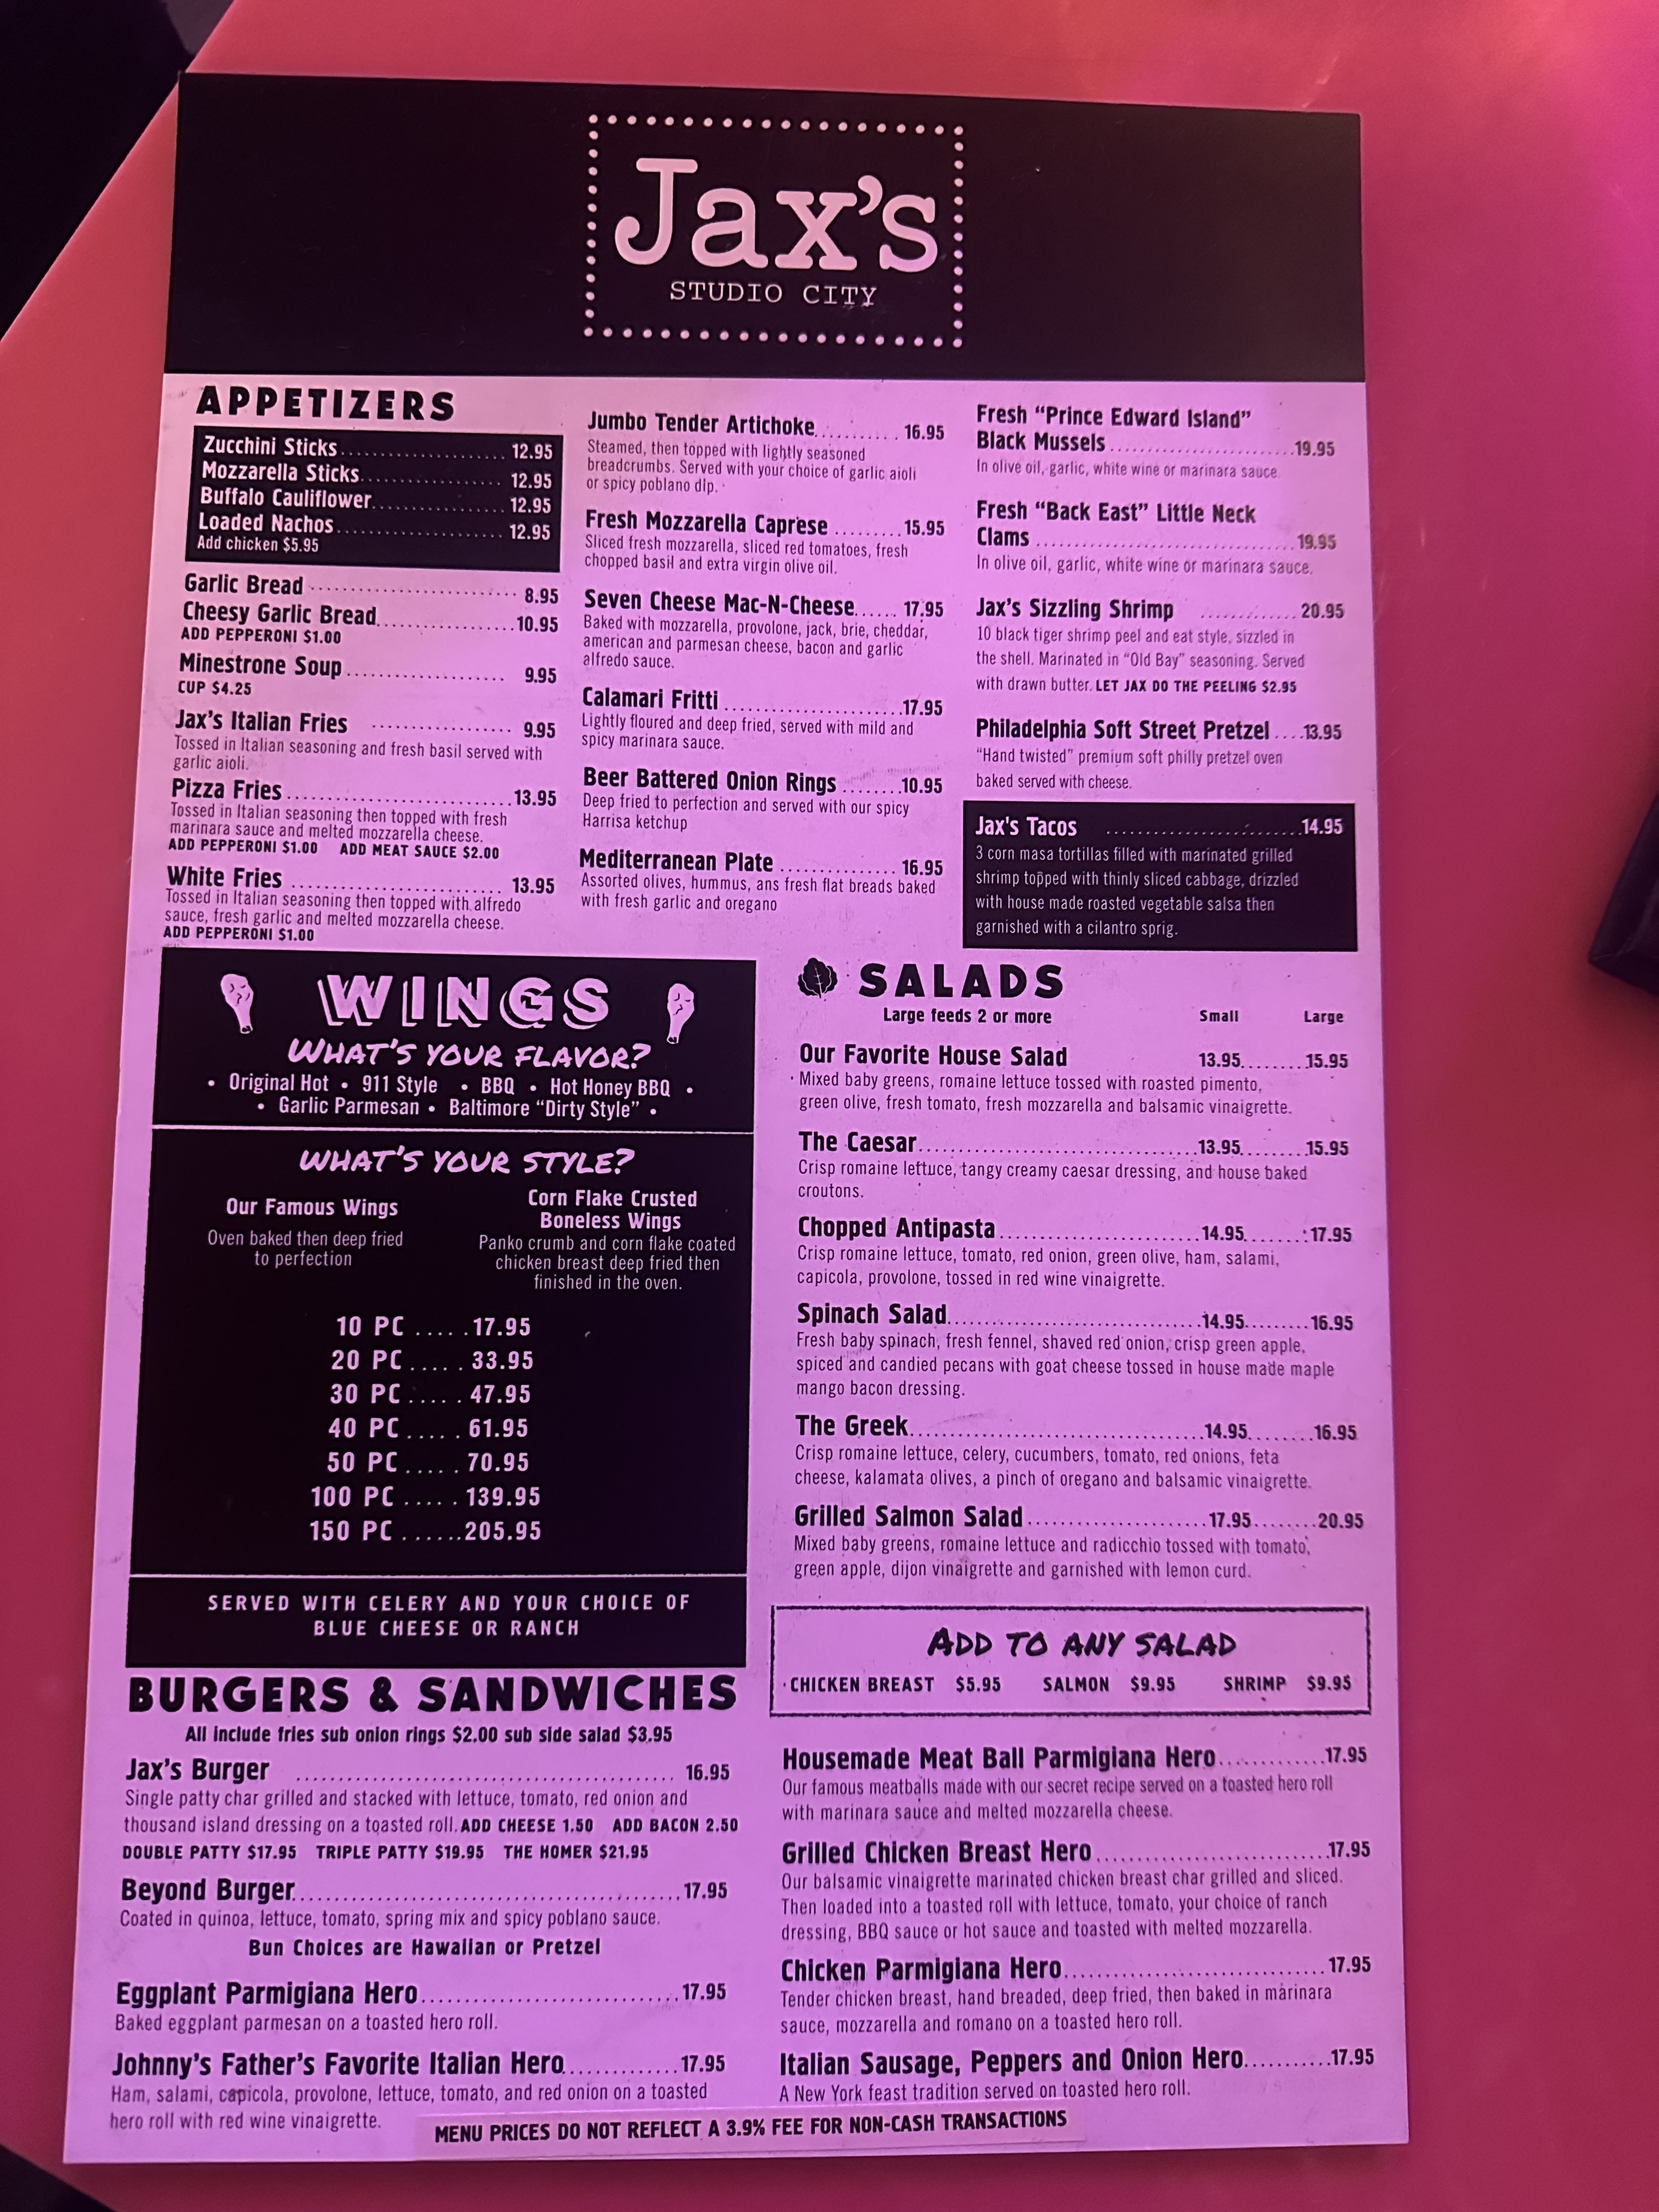 Menu from Jack&#x27;s Studio City featuring appetizers, wings, salads, burgers, sandwiches, and specialty items